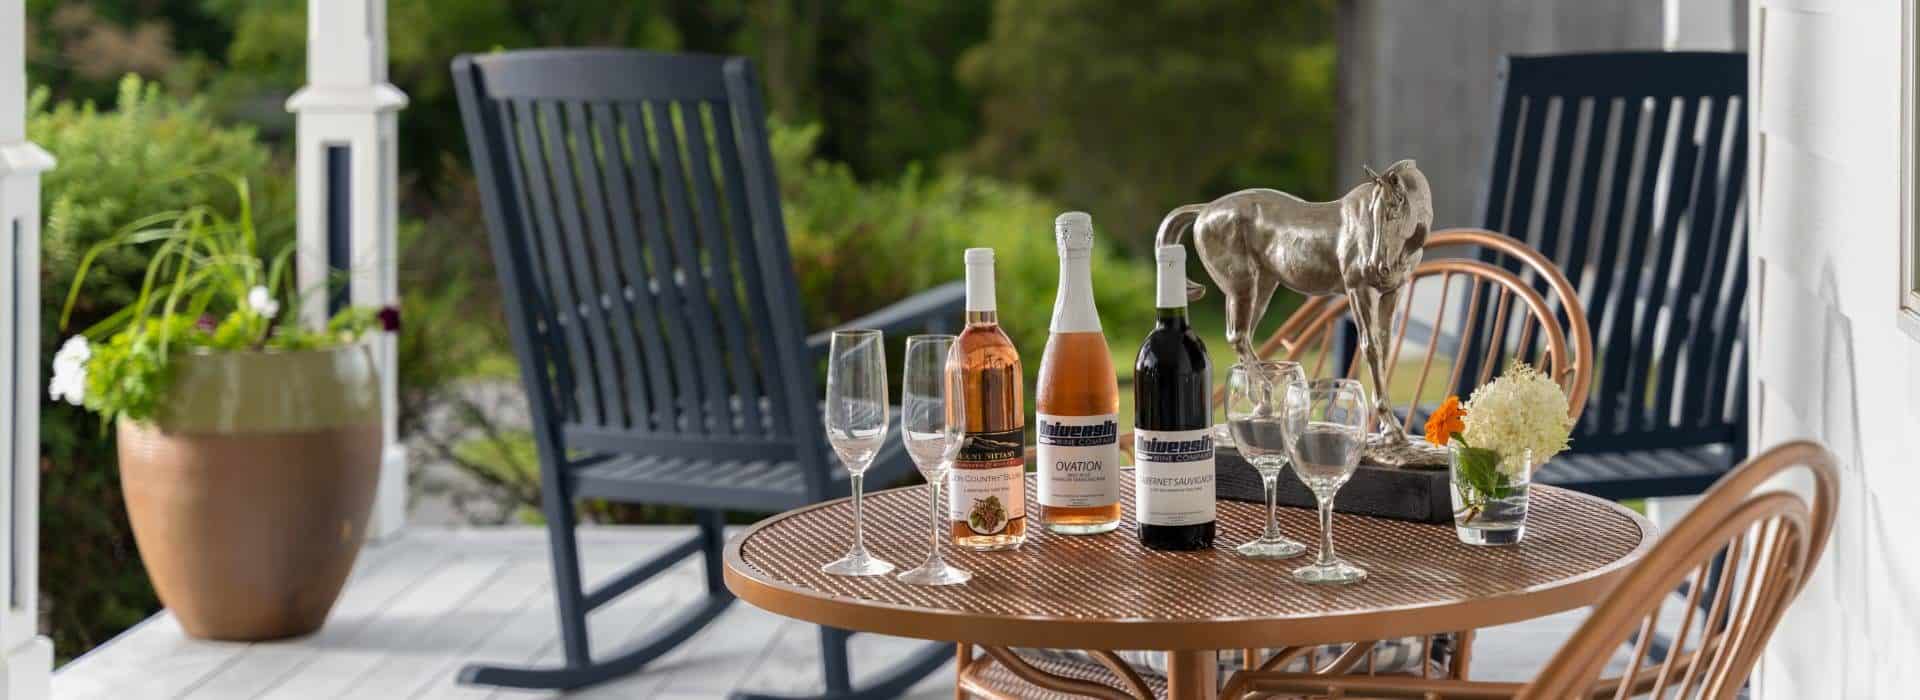 Close up view of copper patio table with multiple bottles of wine and wine glasses